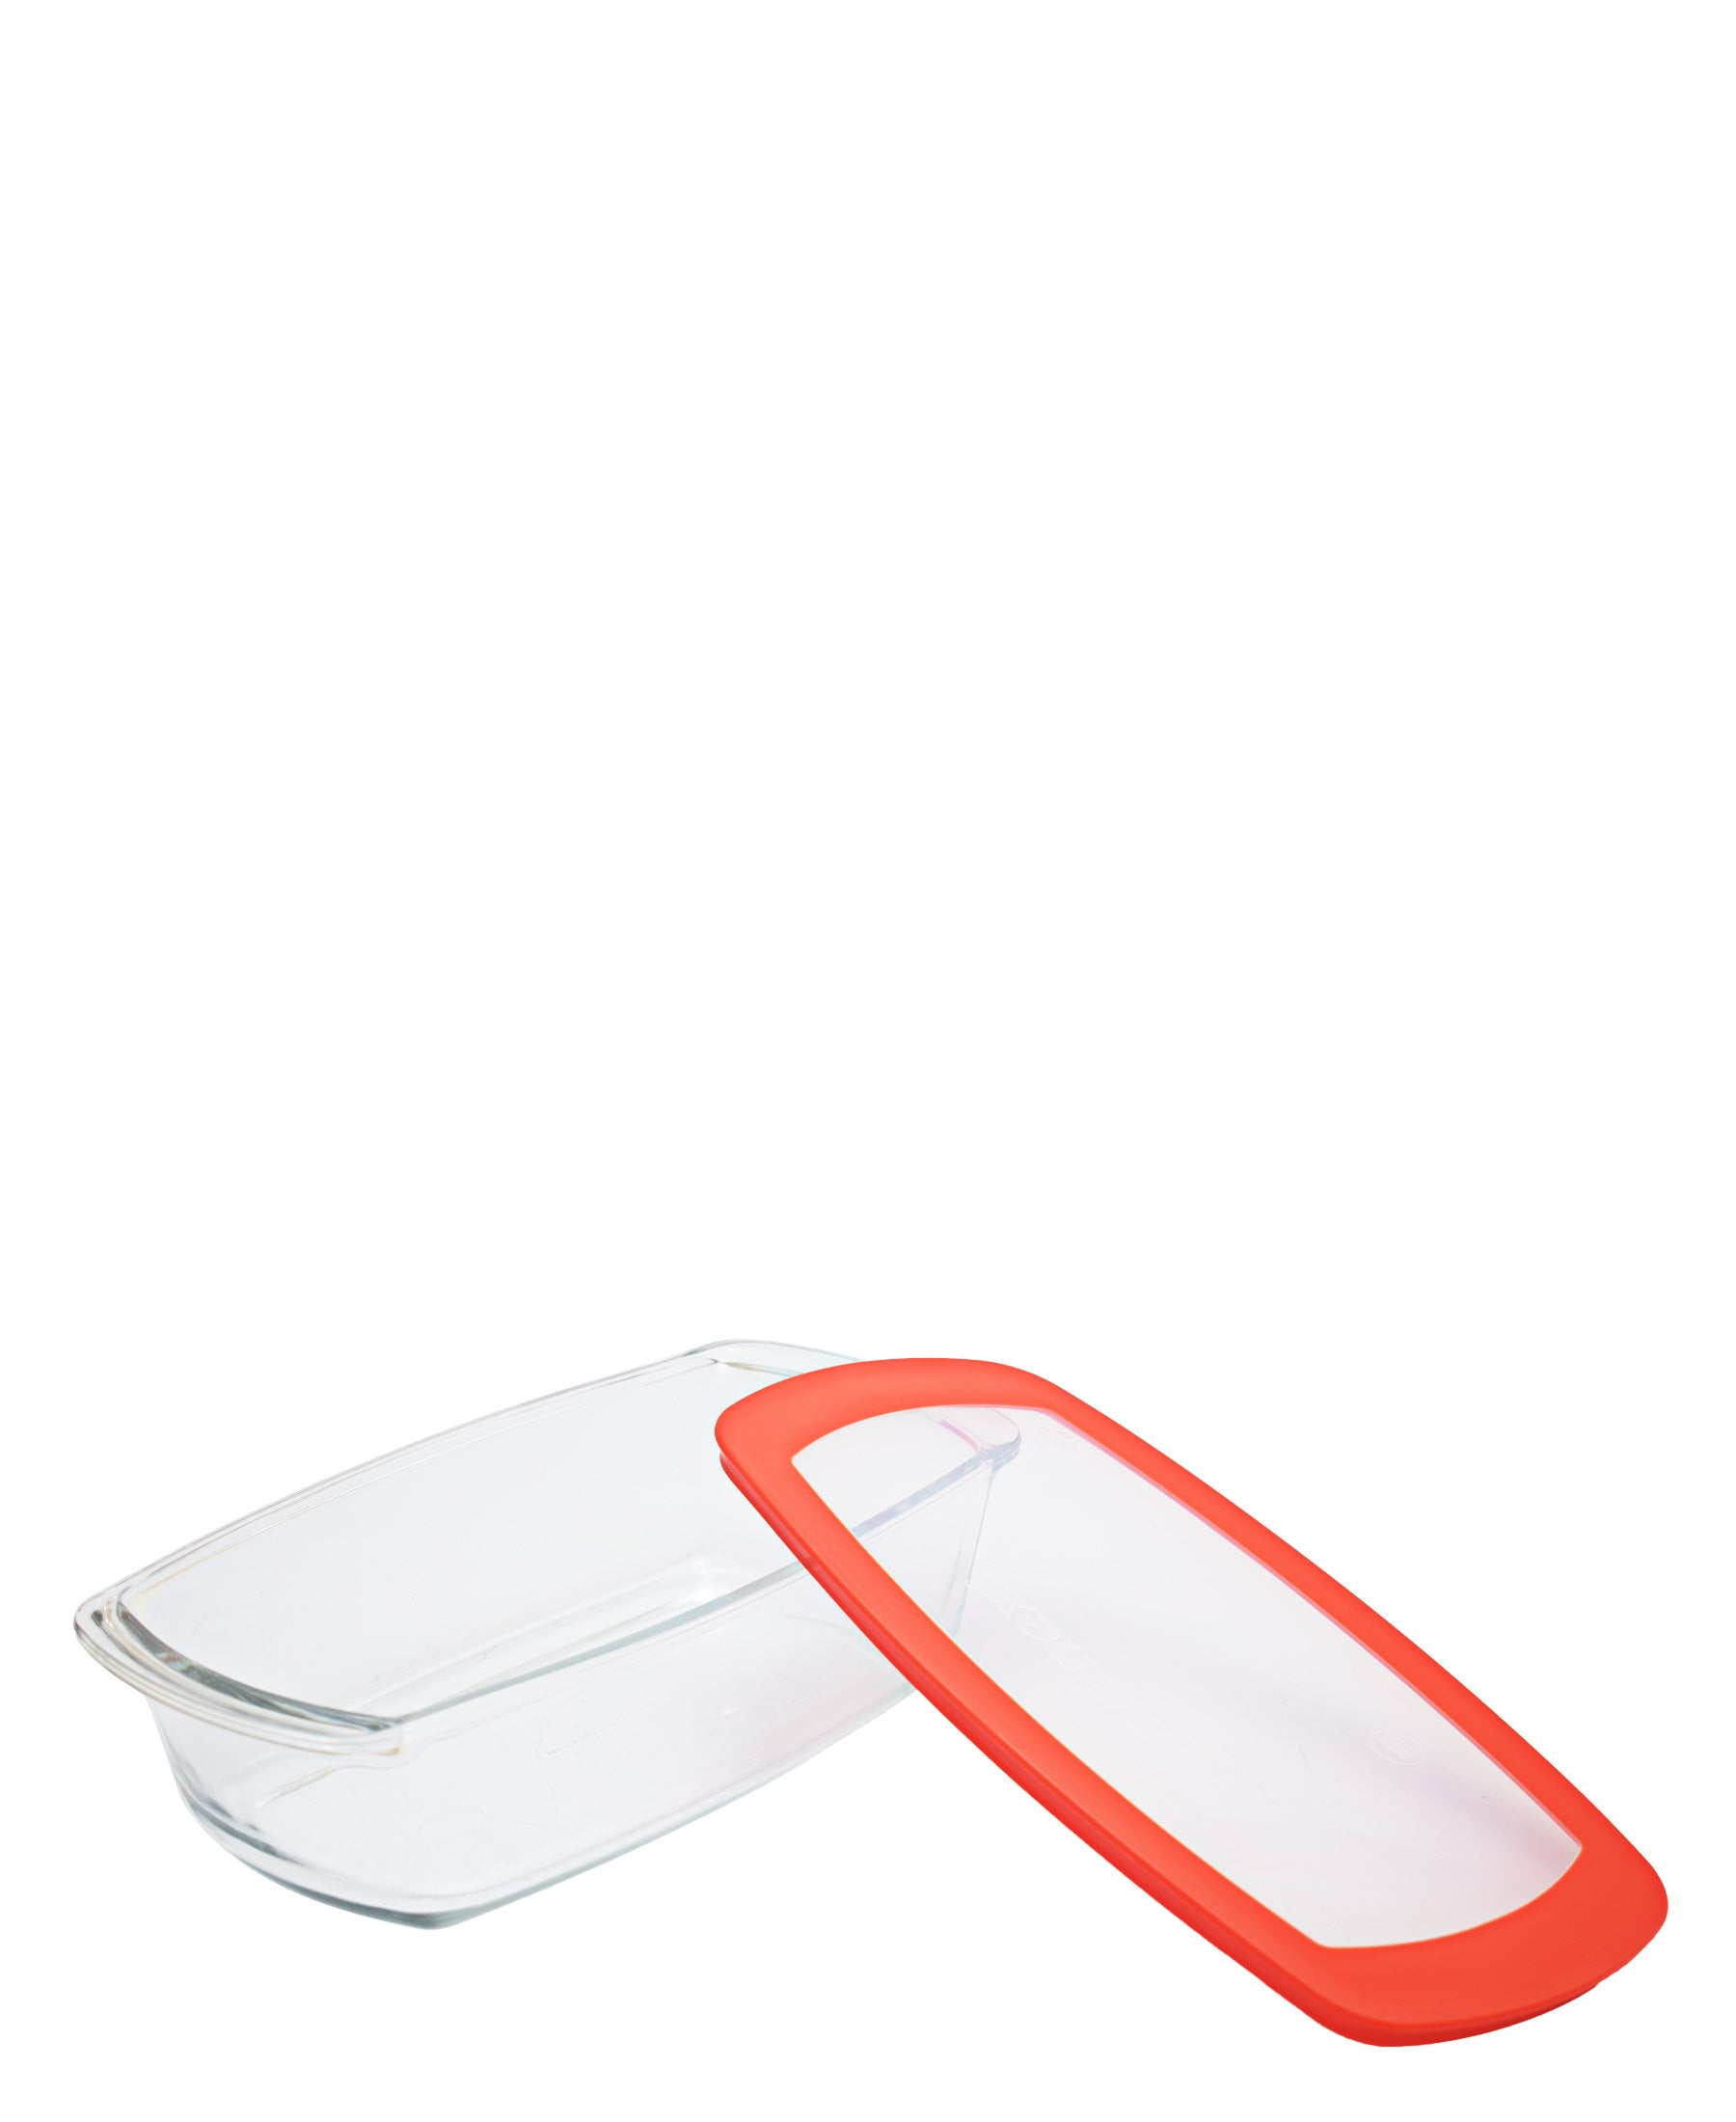 Marinex Rectangular Loaf Dish with Plastic Lid 1.5L - Transparent With Red Lid